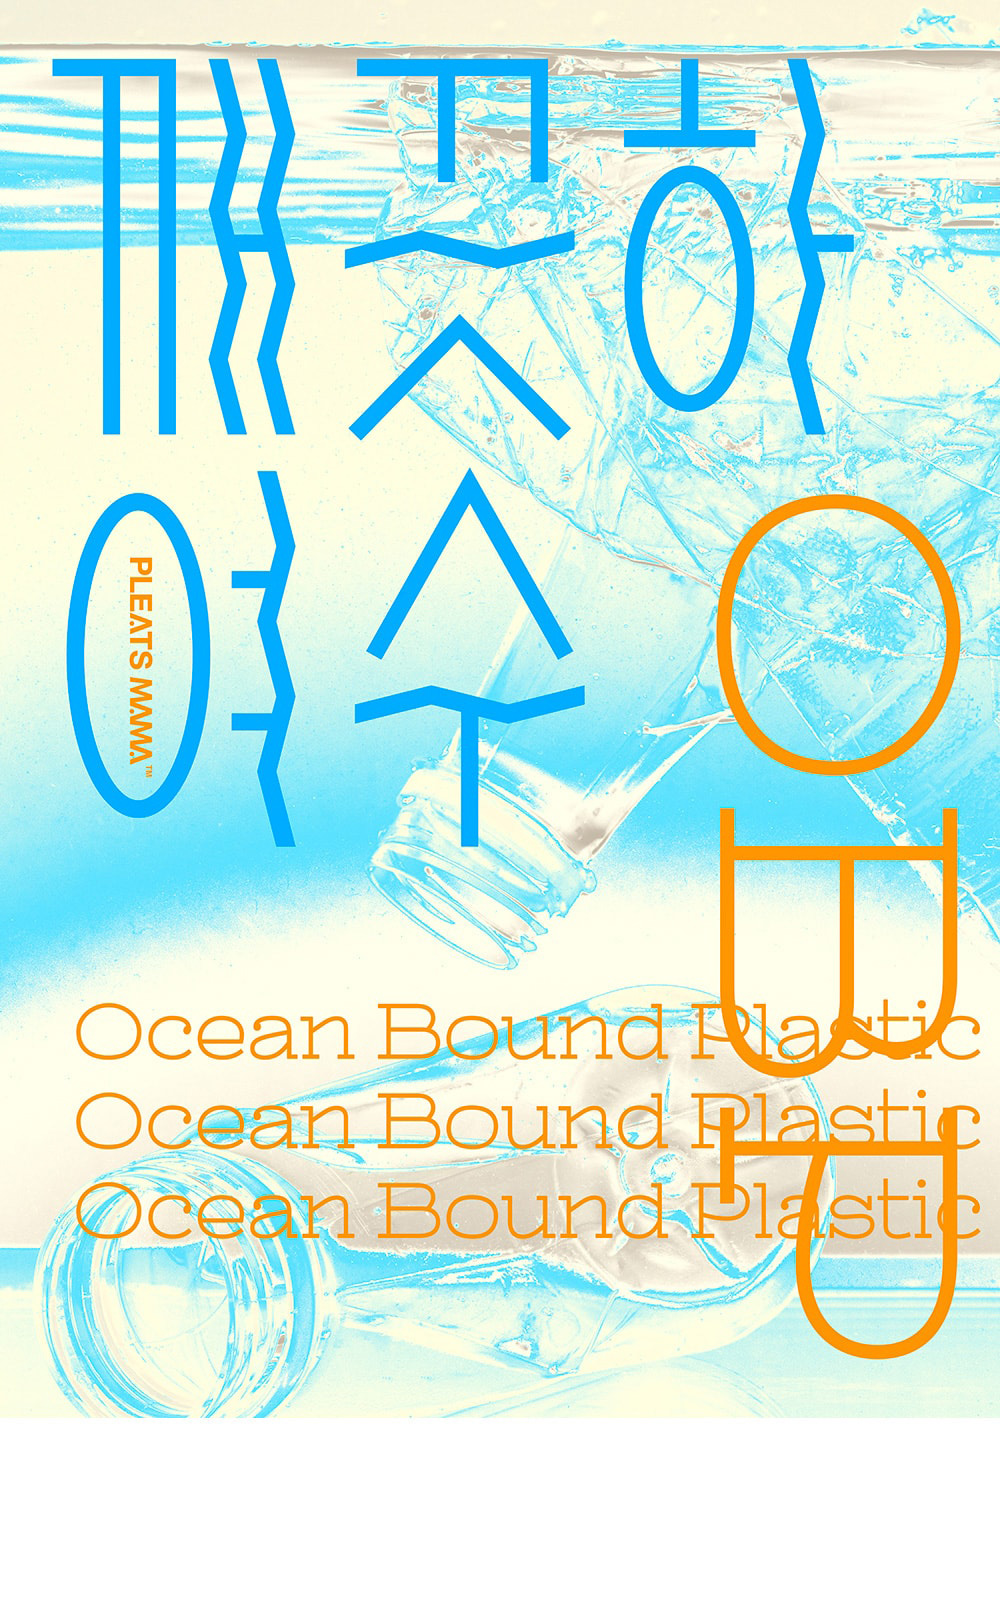 <span style="padding:10px; background:#000; left:0; top:0; position:absolute;">Ocean Bound Plastic</span>